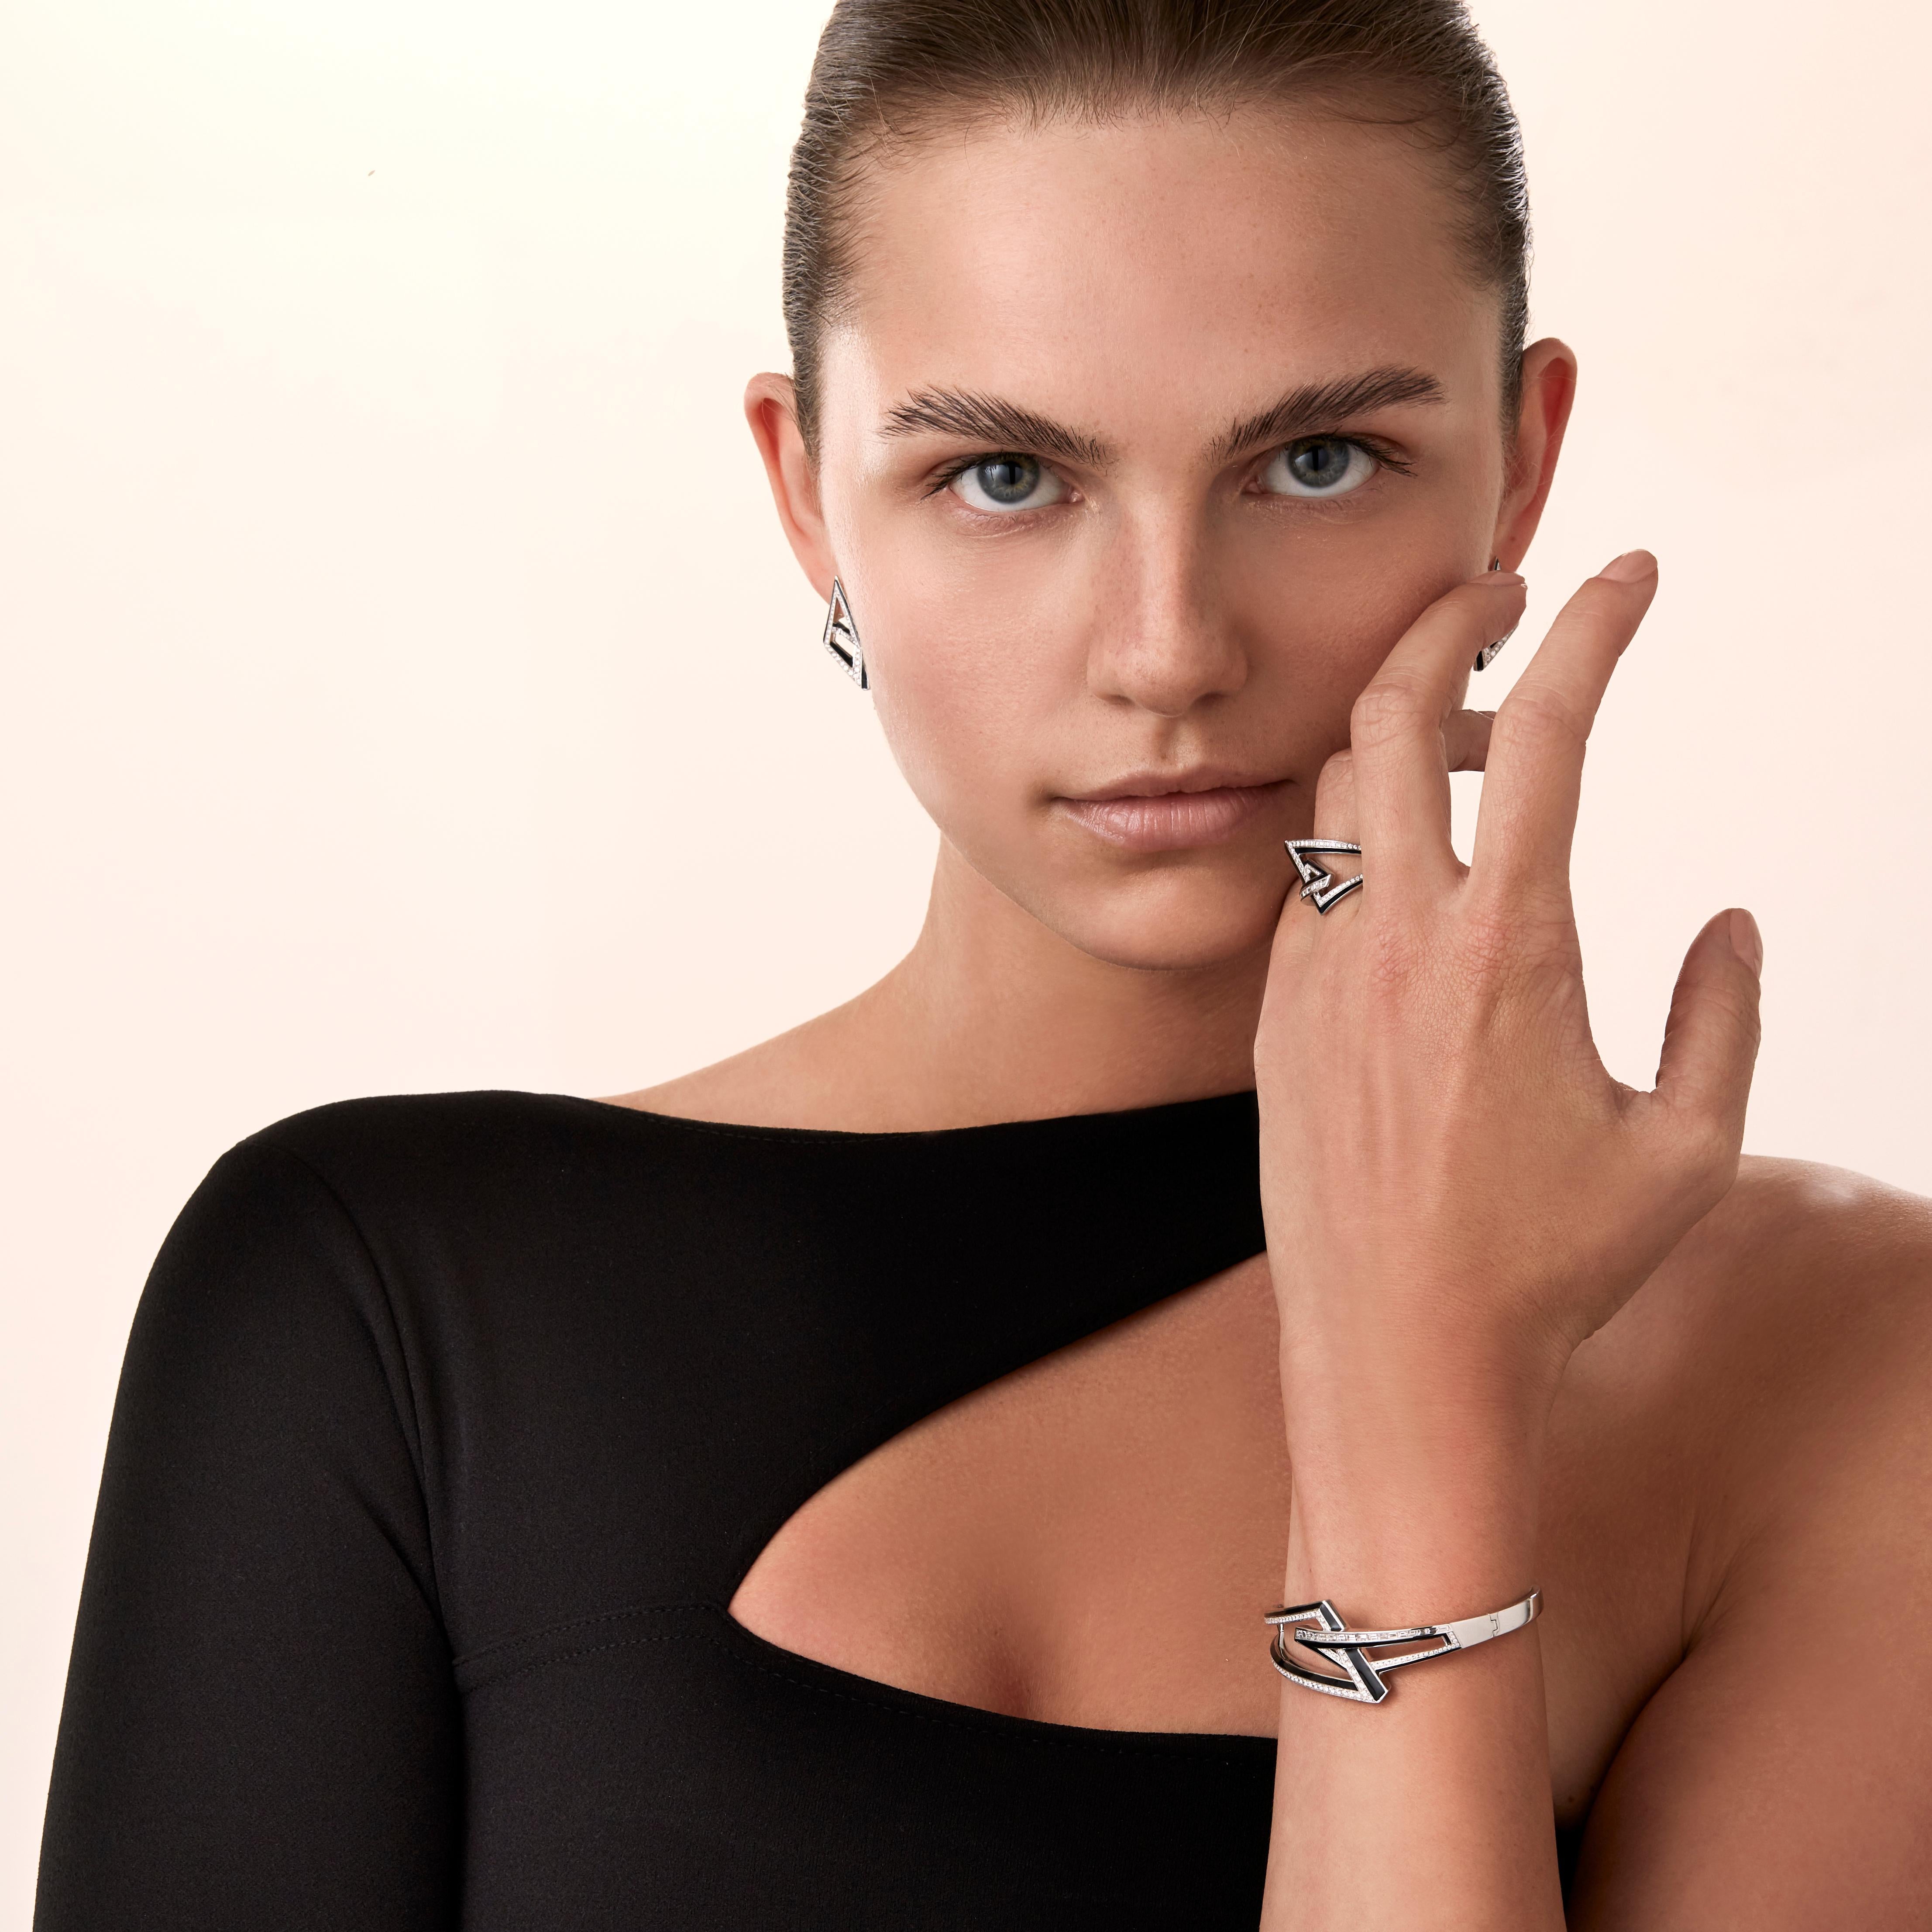 Modern and intriguing, Vertigo combines technology with tradition with mixed media materials of titanium and ceramic enamel, precious metals, diamonds and exotic baguette cut spinels. Vertigo is a collection of strong angular lines, bold colour and